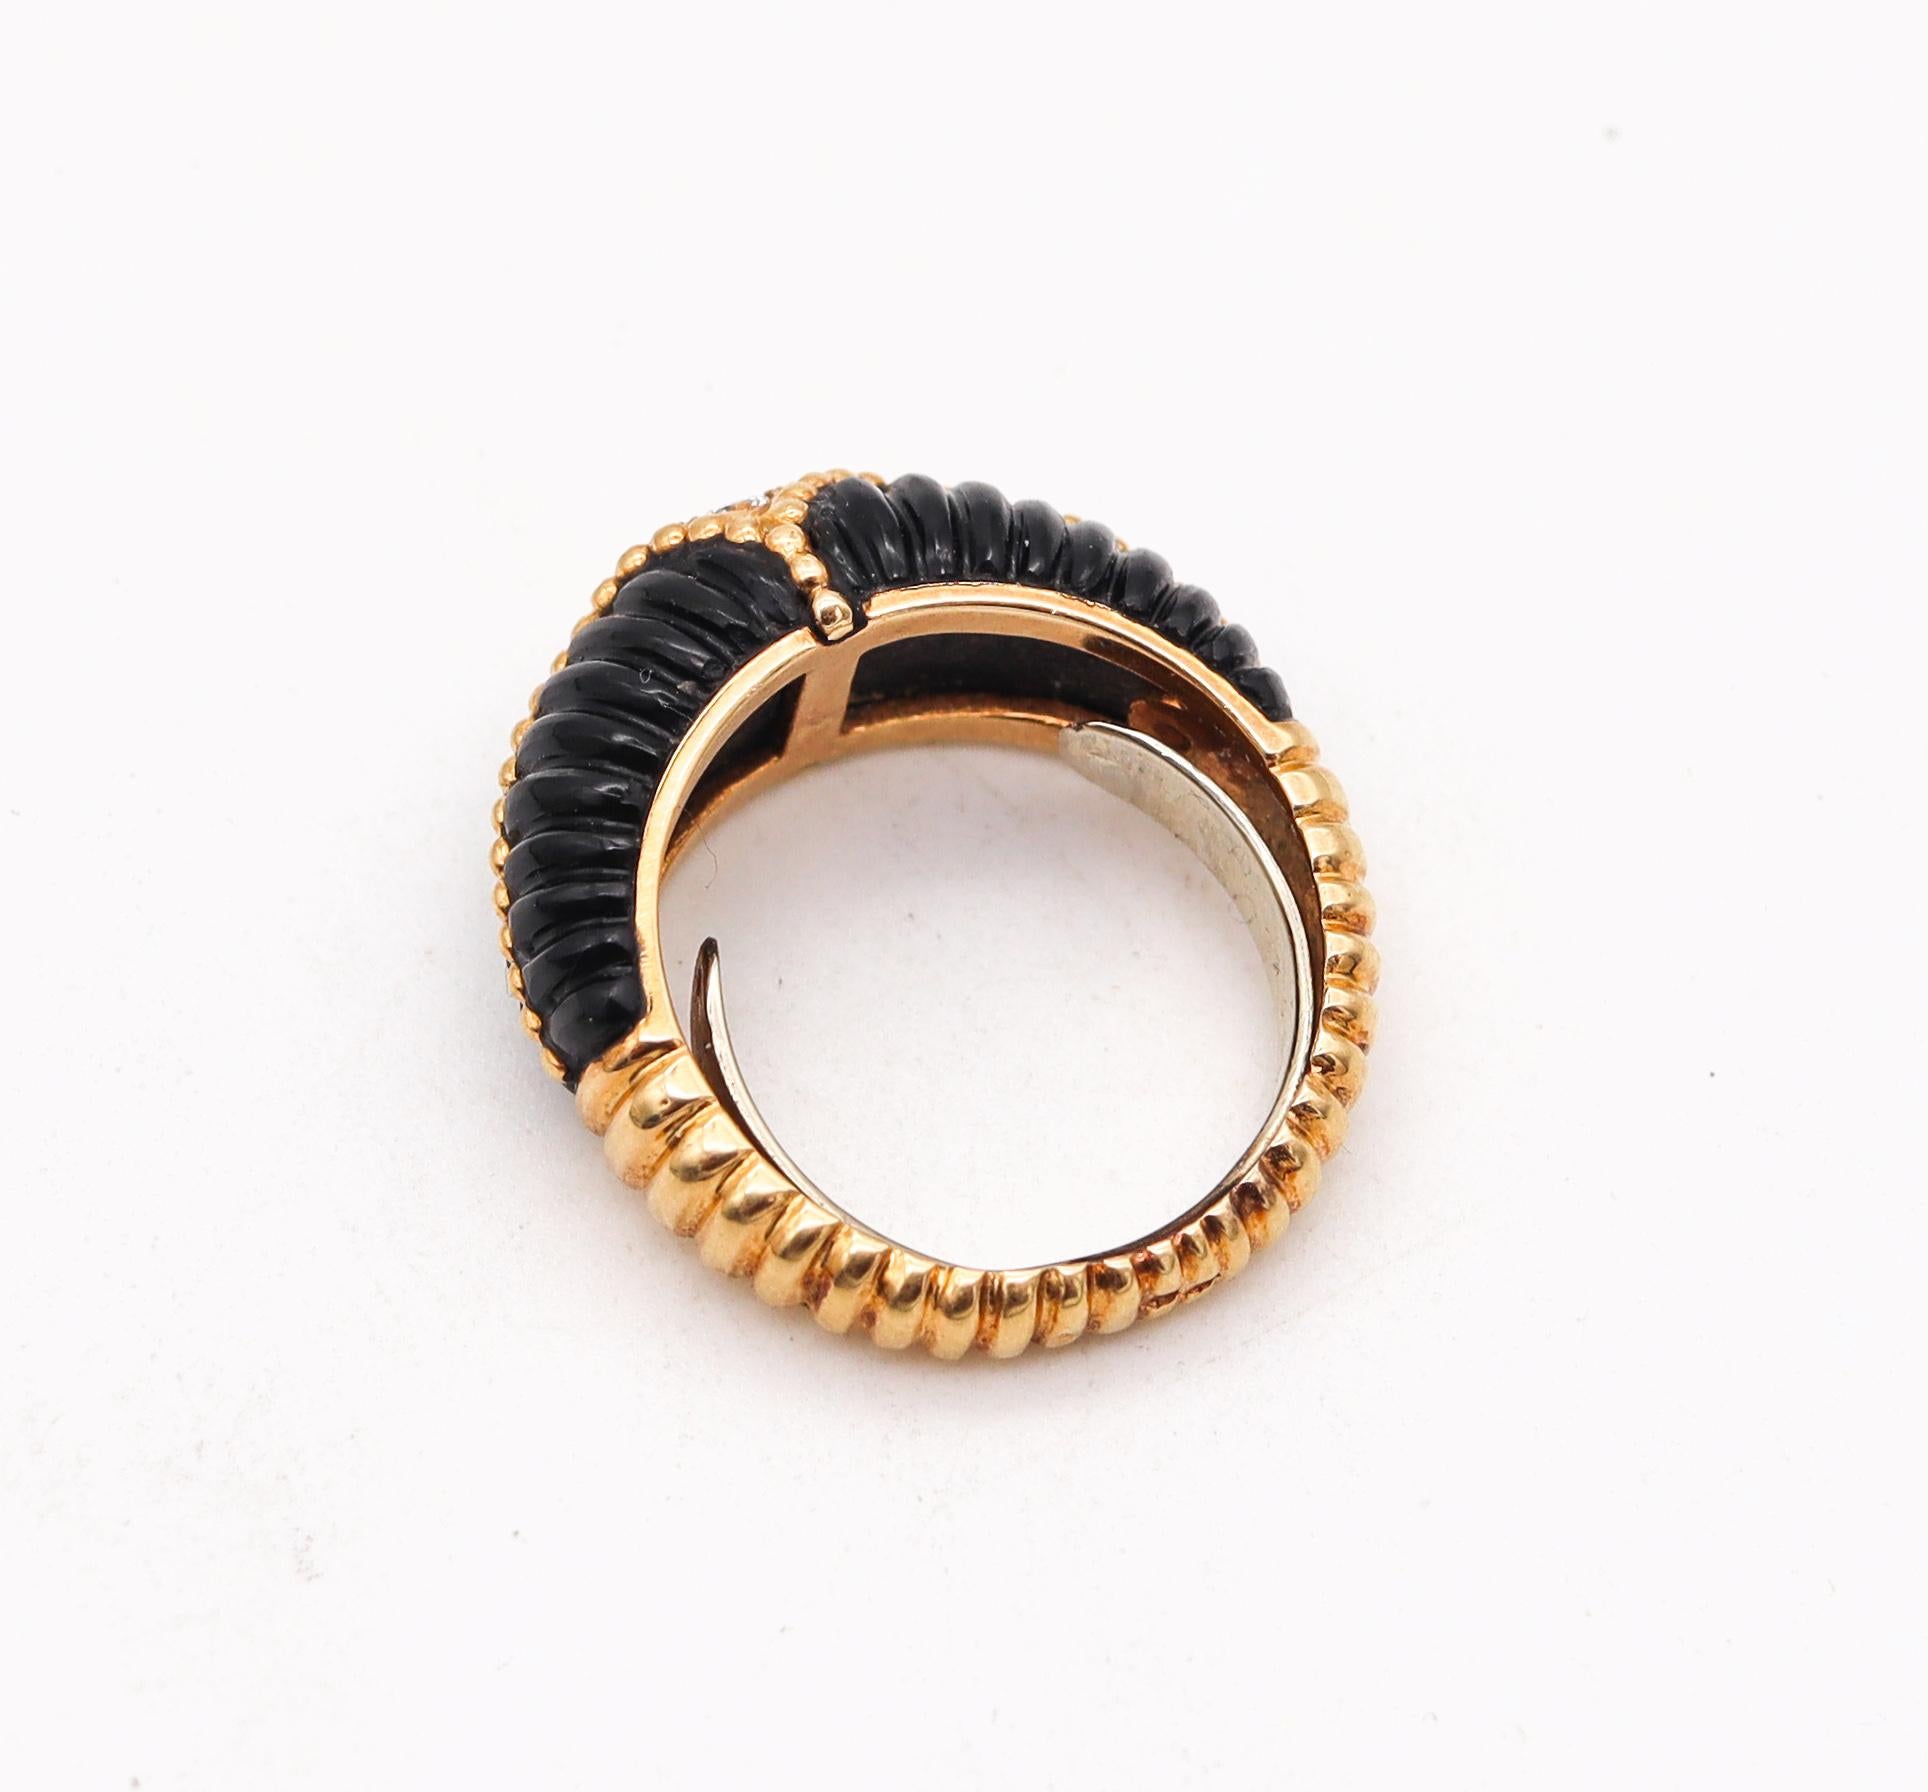 Modernist Van Cleef & Arpels 1970 Paris Fluted Onyx Ring in 18Kt Yellow Gold with Diamonds